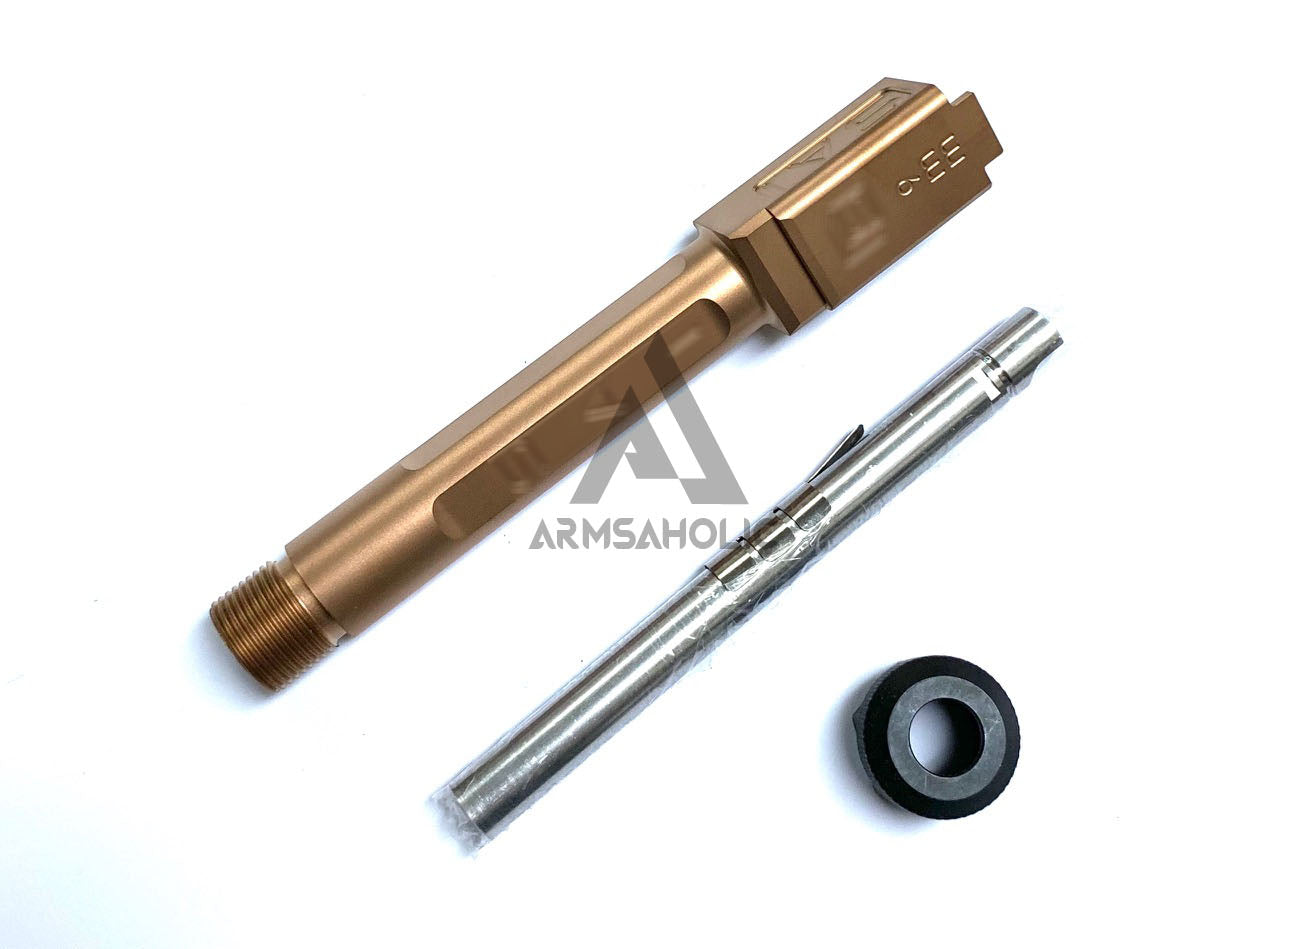 Guns Modify S-Style Stainless Steel Thread Outer Barrel for Marui G19 GBB (Nitride/Golden) CCW 14MM